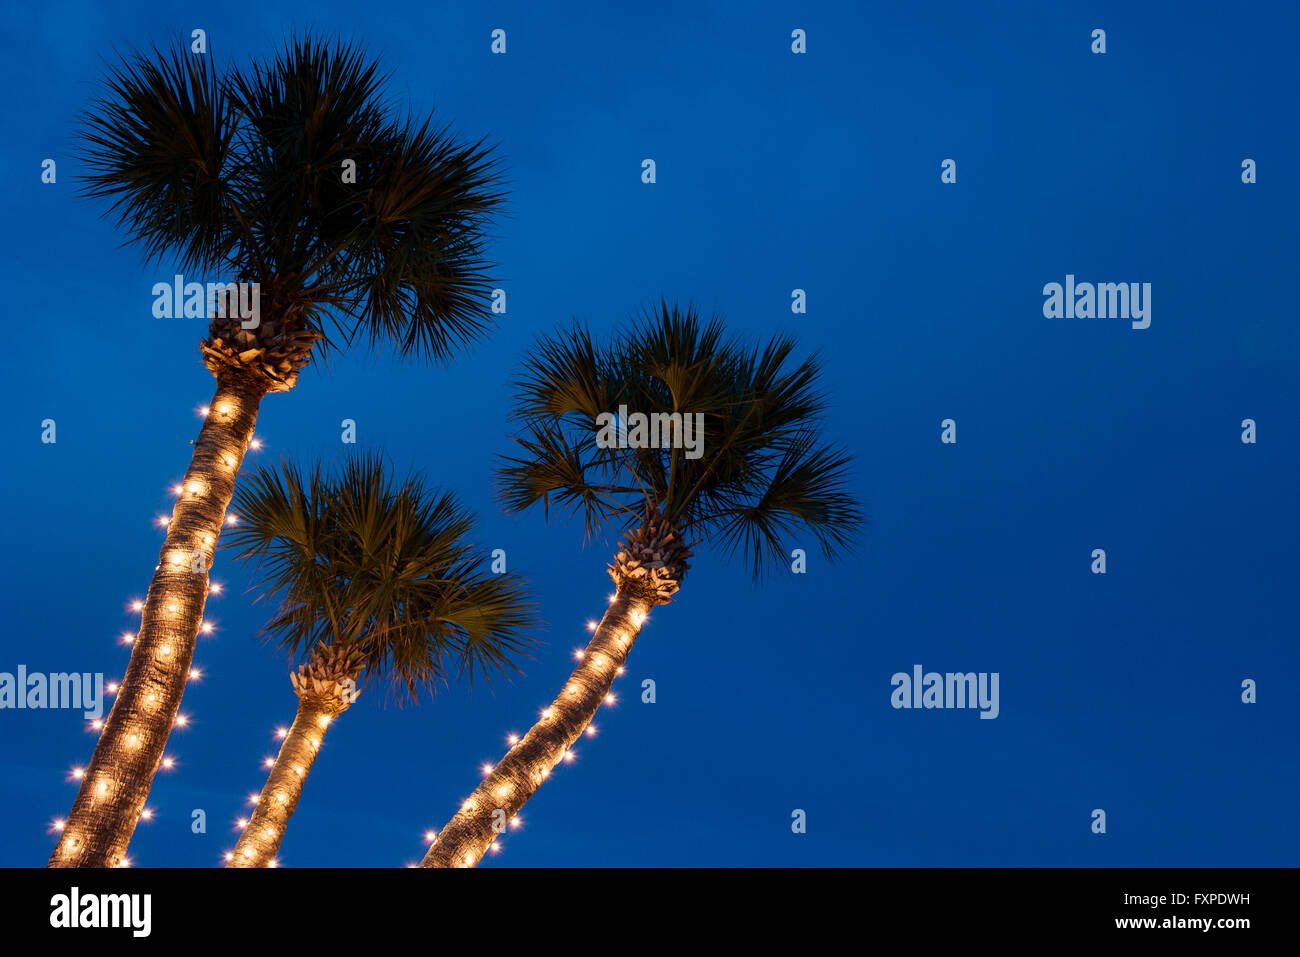 Palm trees decorated with Christmas lights Stock Photo